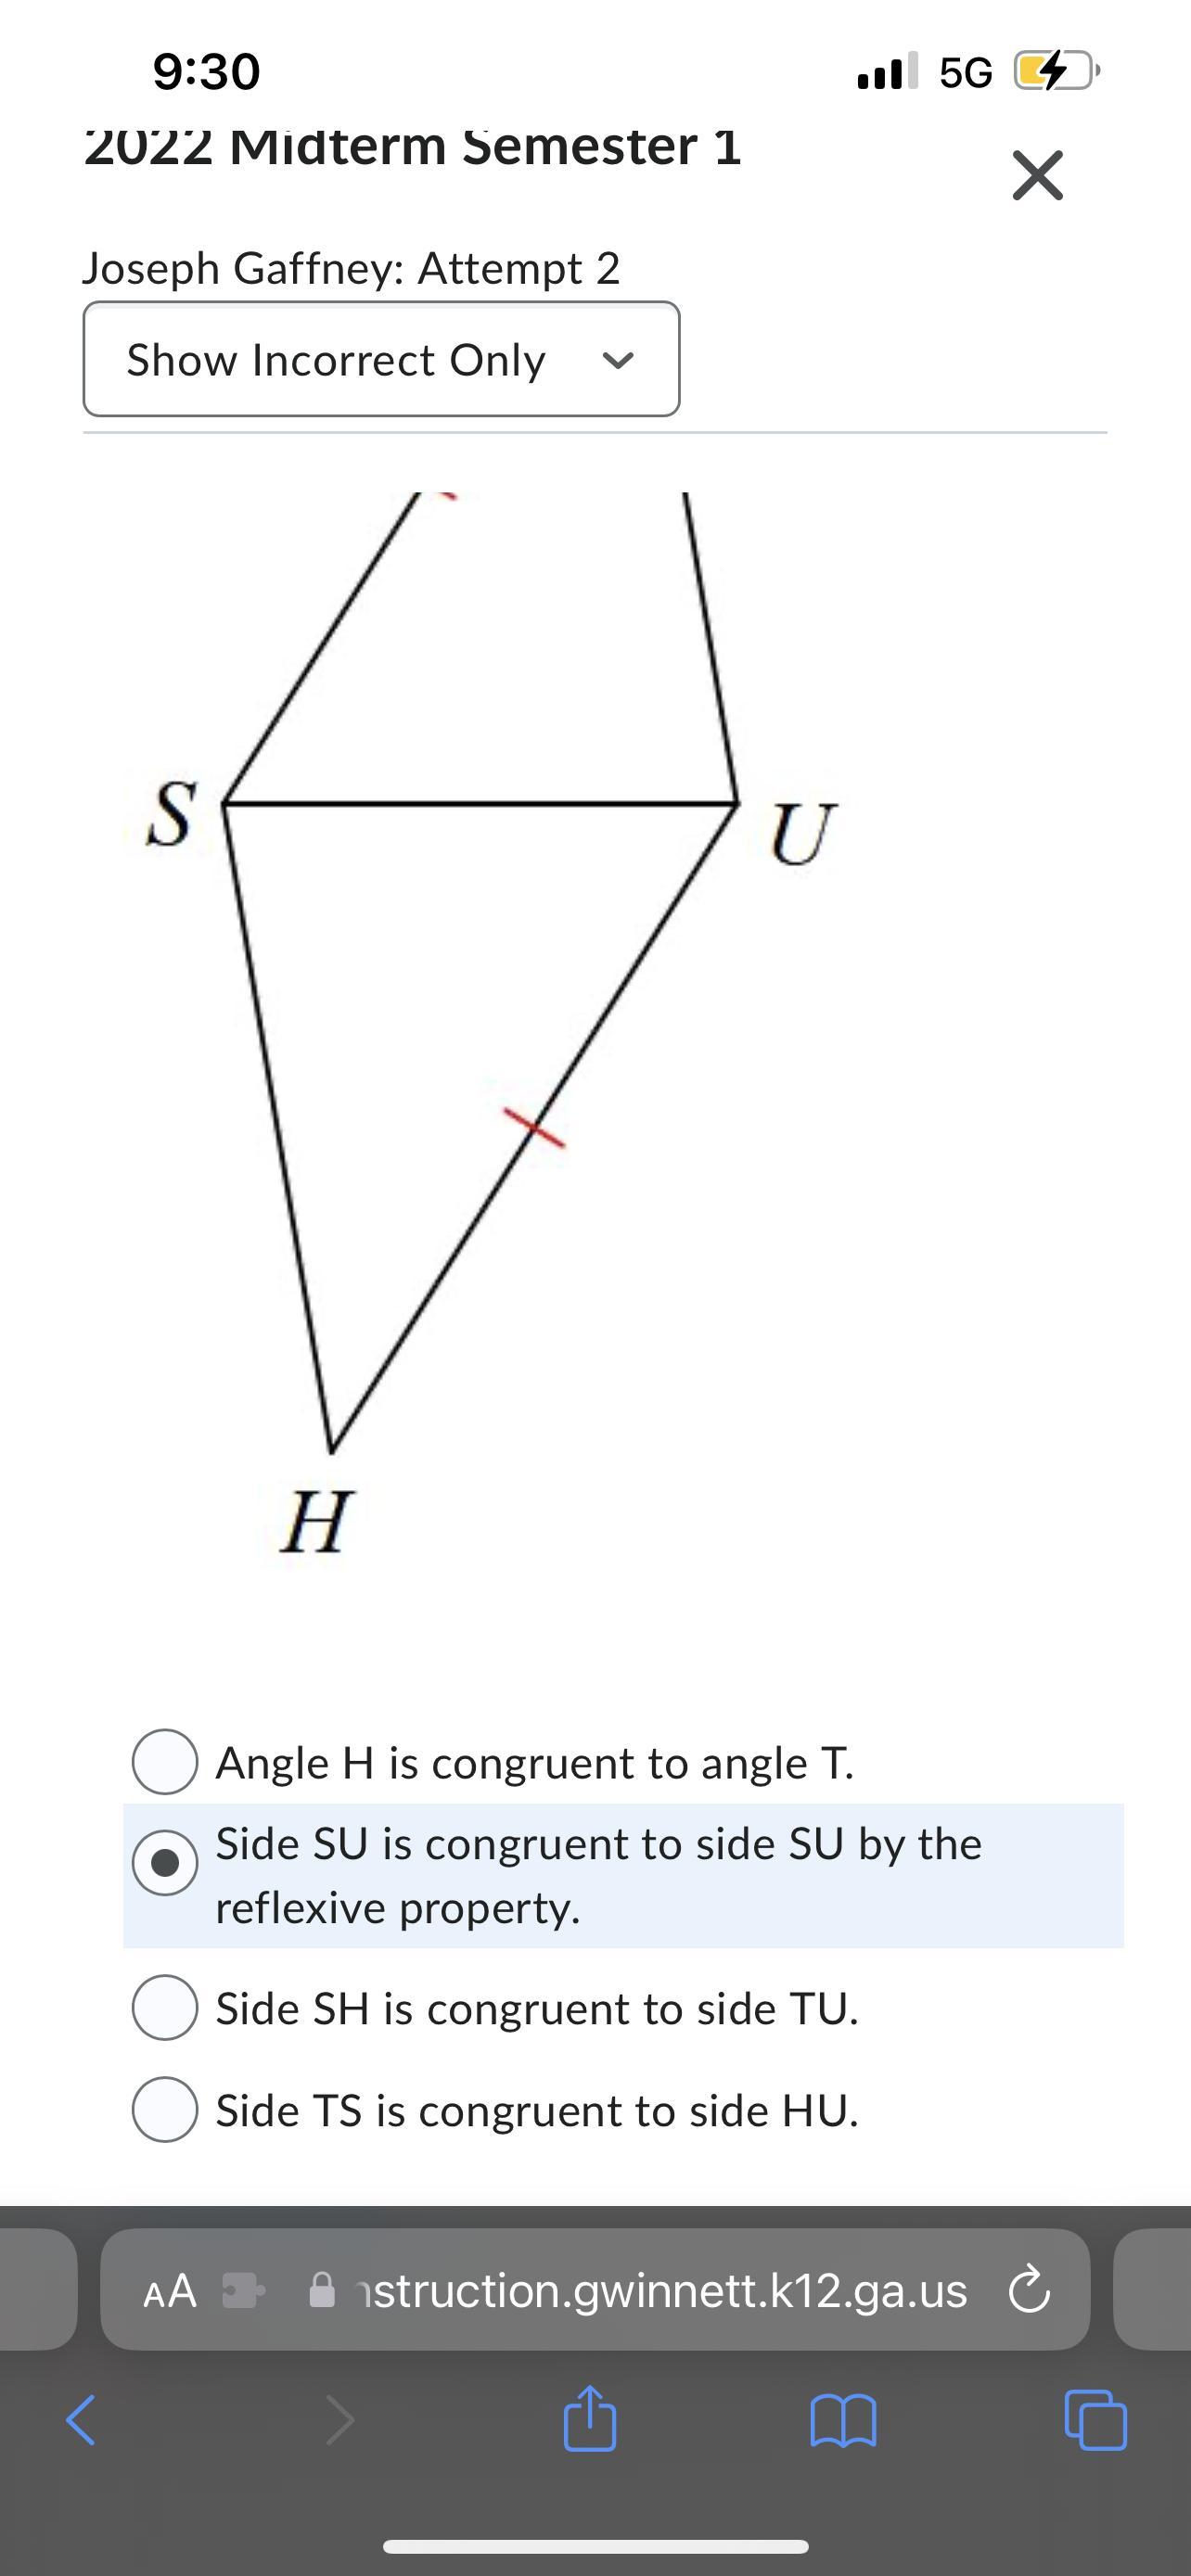 Which Additional Piece Of Information Would You Need To Prove These Two Triangles Are Congruent Using